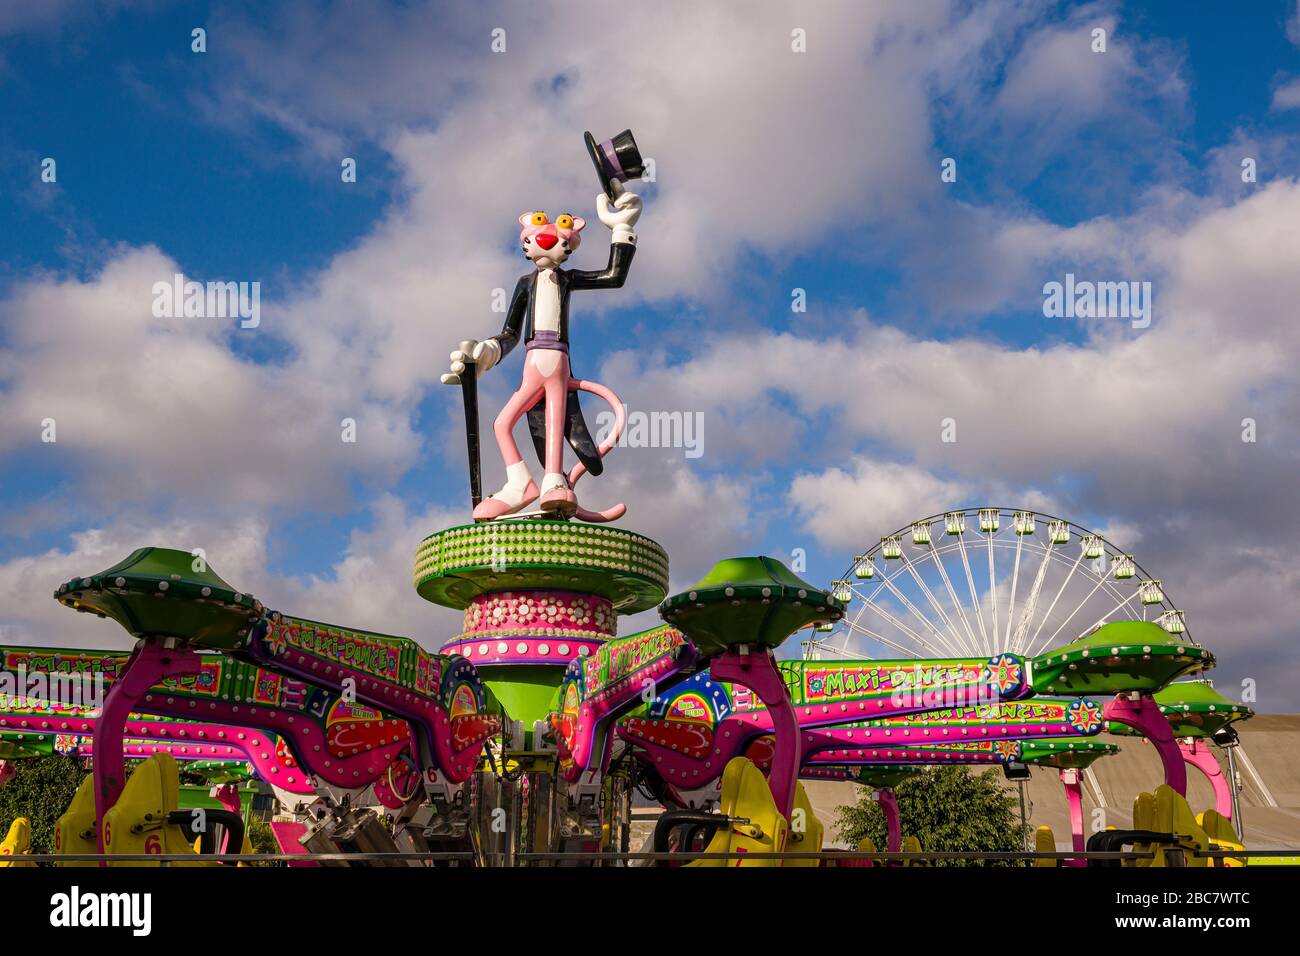 Colorful sculpture of the comic character Pink Panther in an amusement park Stock Photo